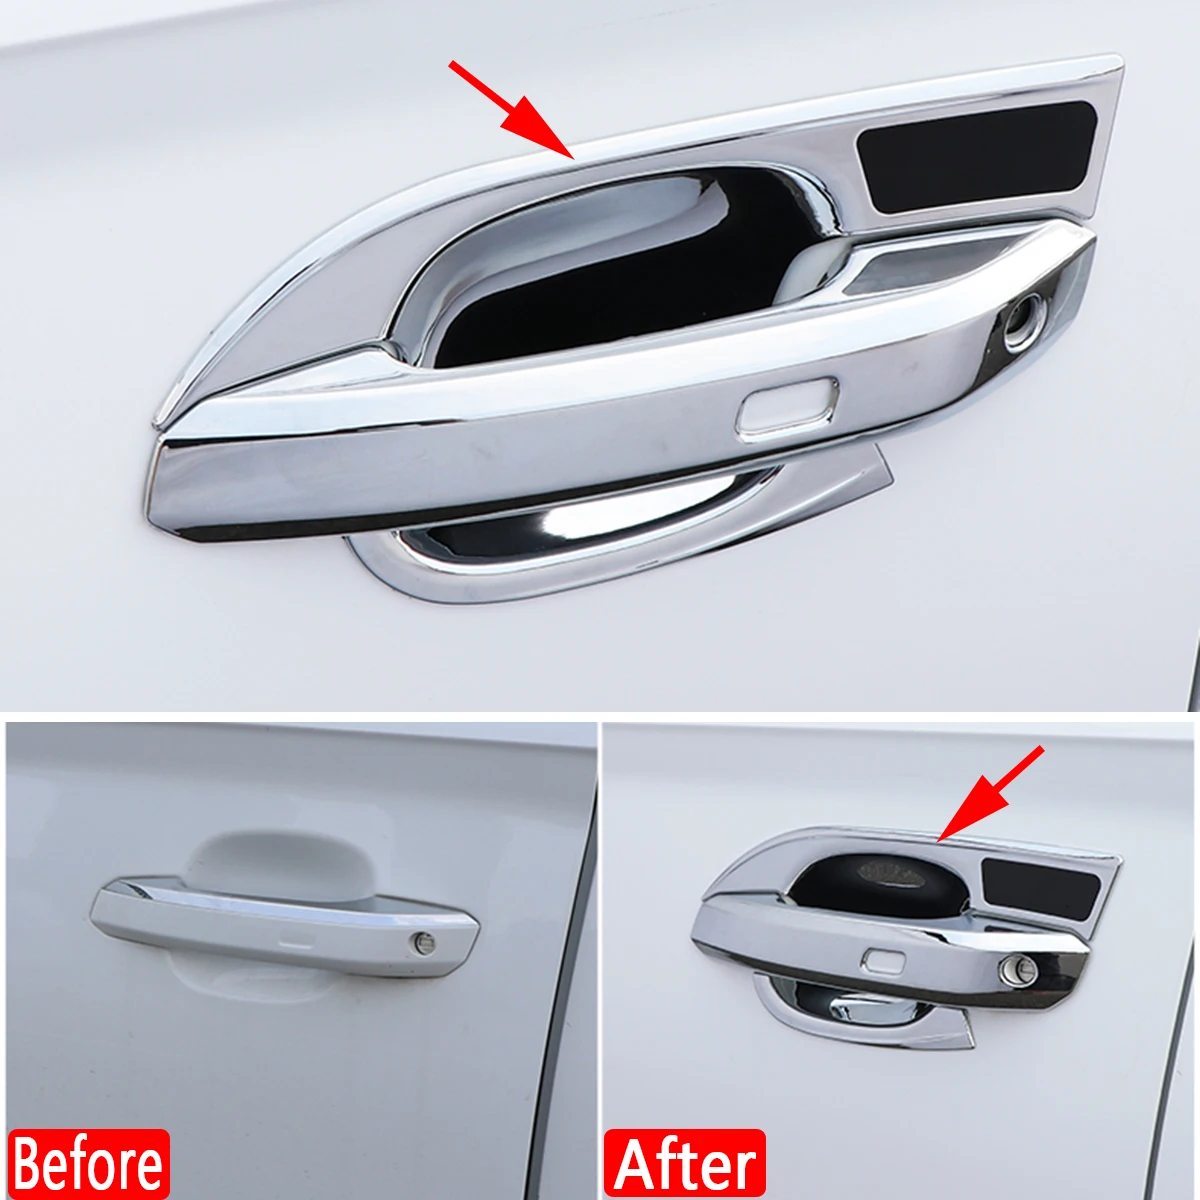 

For Audi Q5 Sportback SQ5 FY 2017 2018 2019 2020 2021 2022 Car Accessories ABS Chrome Door Handle Surrounds Protector